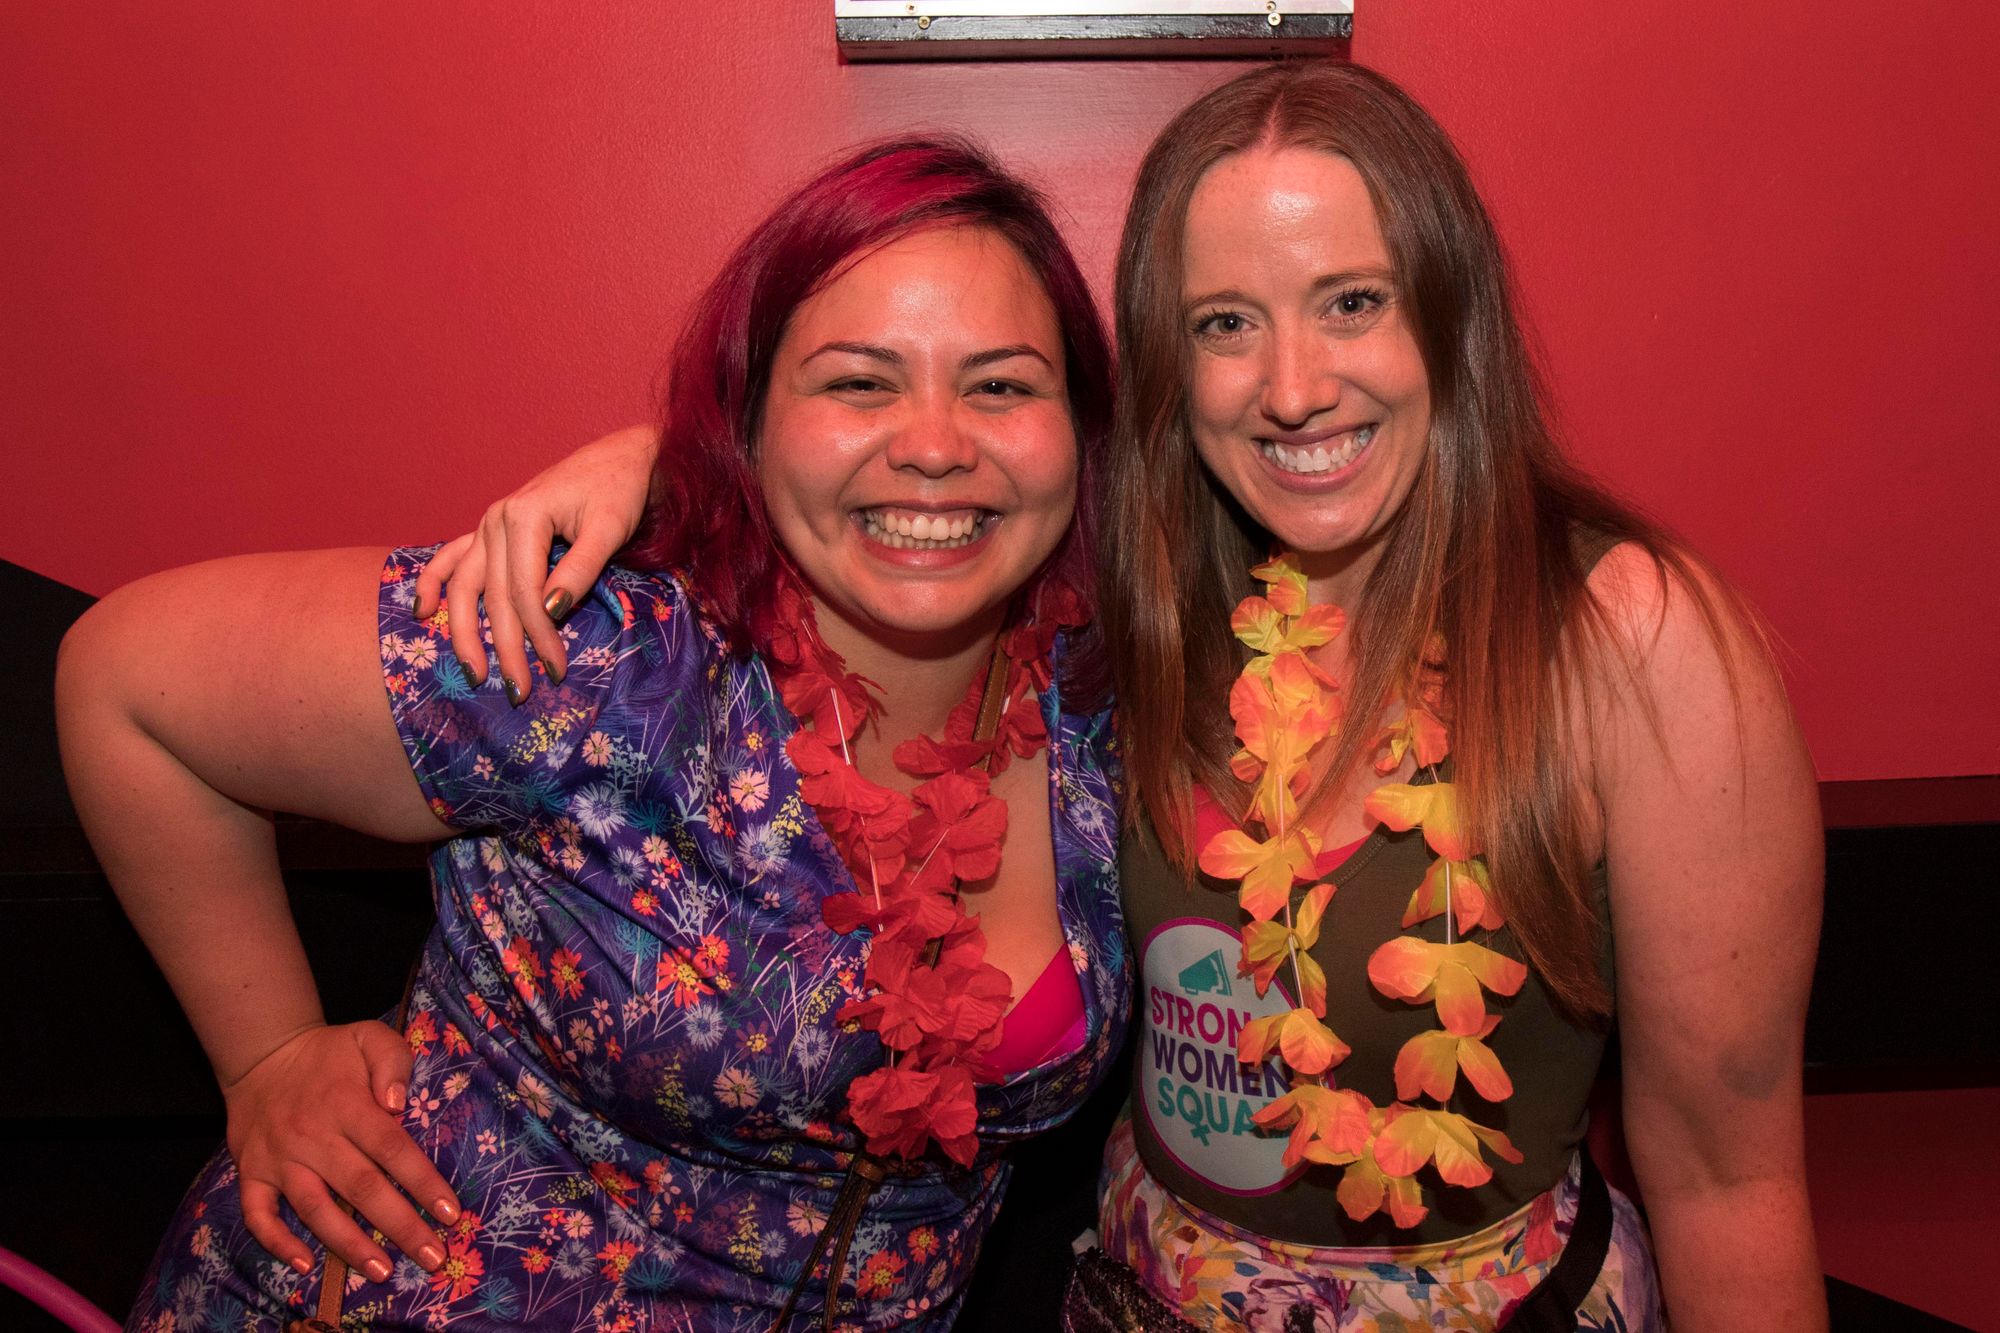 Huhbub’s founder and digital witch Sara Veal (left) with Lisa Dickenson, author and founder of Strong Women Squad, at Shake It Off! The Strong Women Squad Summer Party.
📸 Craig Simmonds